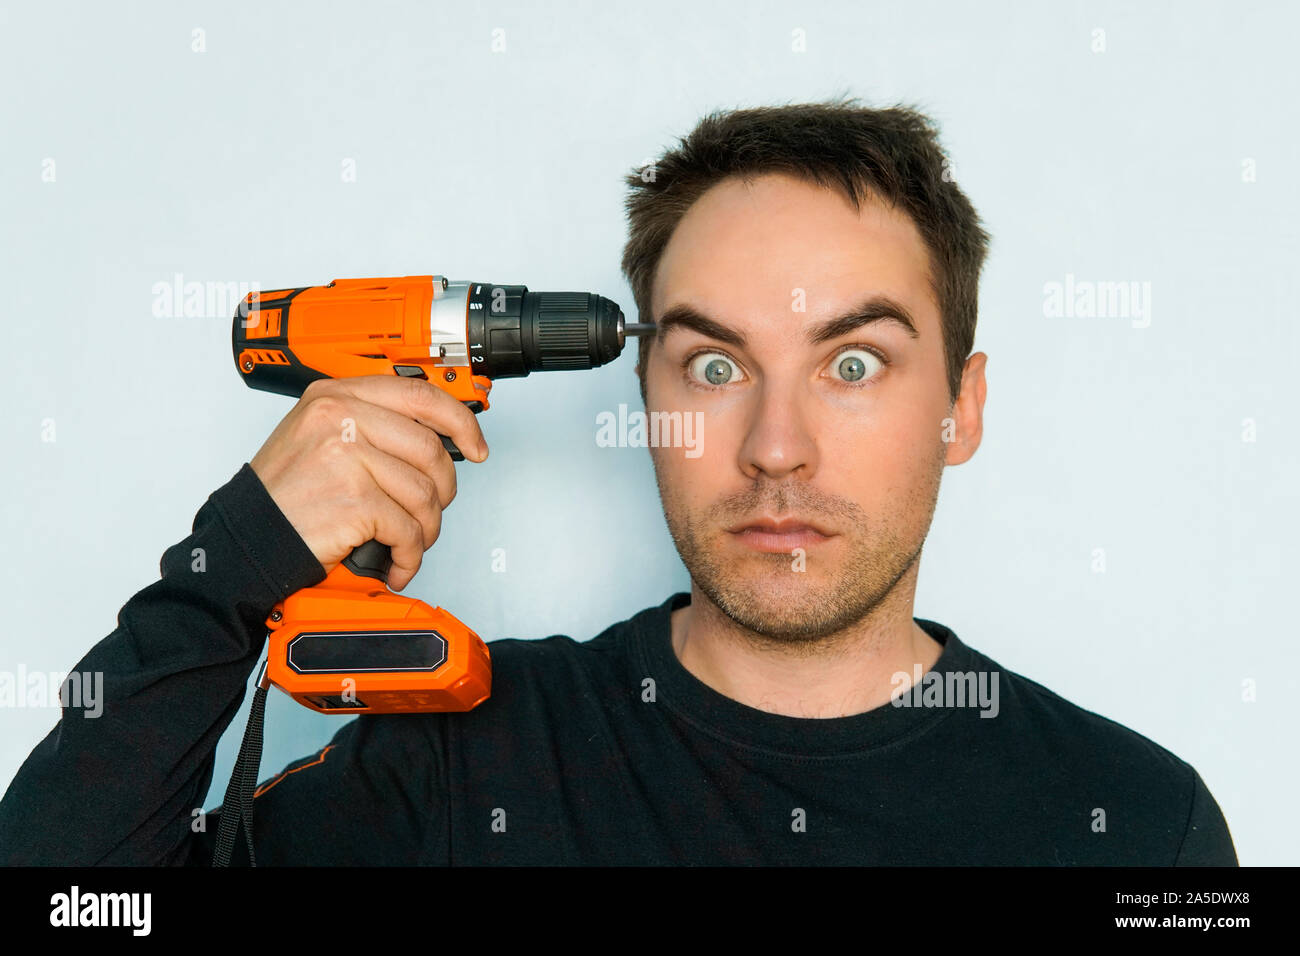 out of my mind. male Builder drills his brains out. Crazy guy with a stupid face. Fatigue from hard work. Inadequate customer. portrait of psychopath Stock Photo